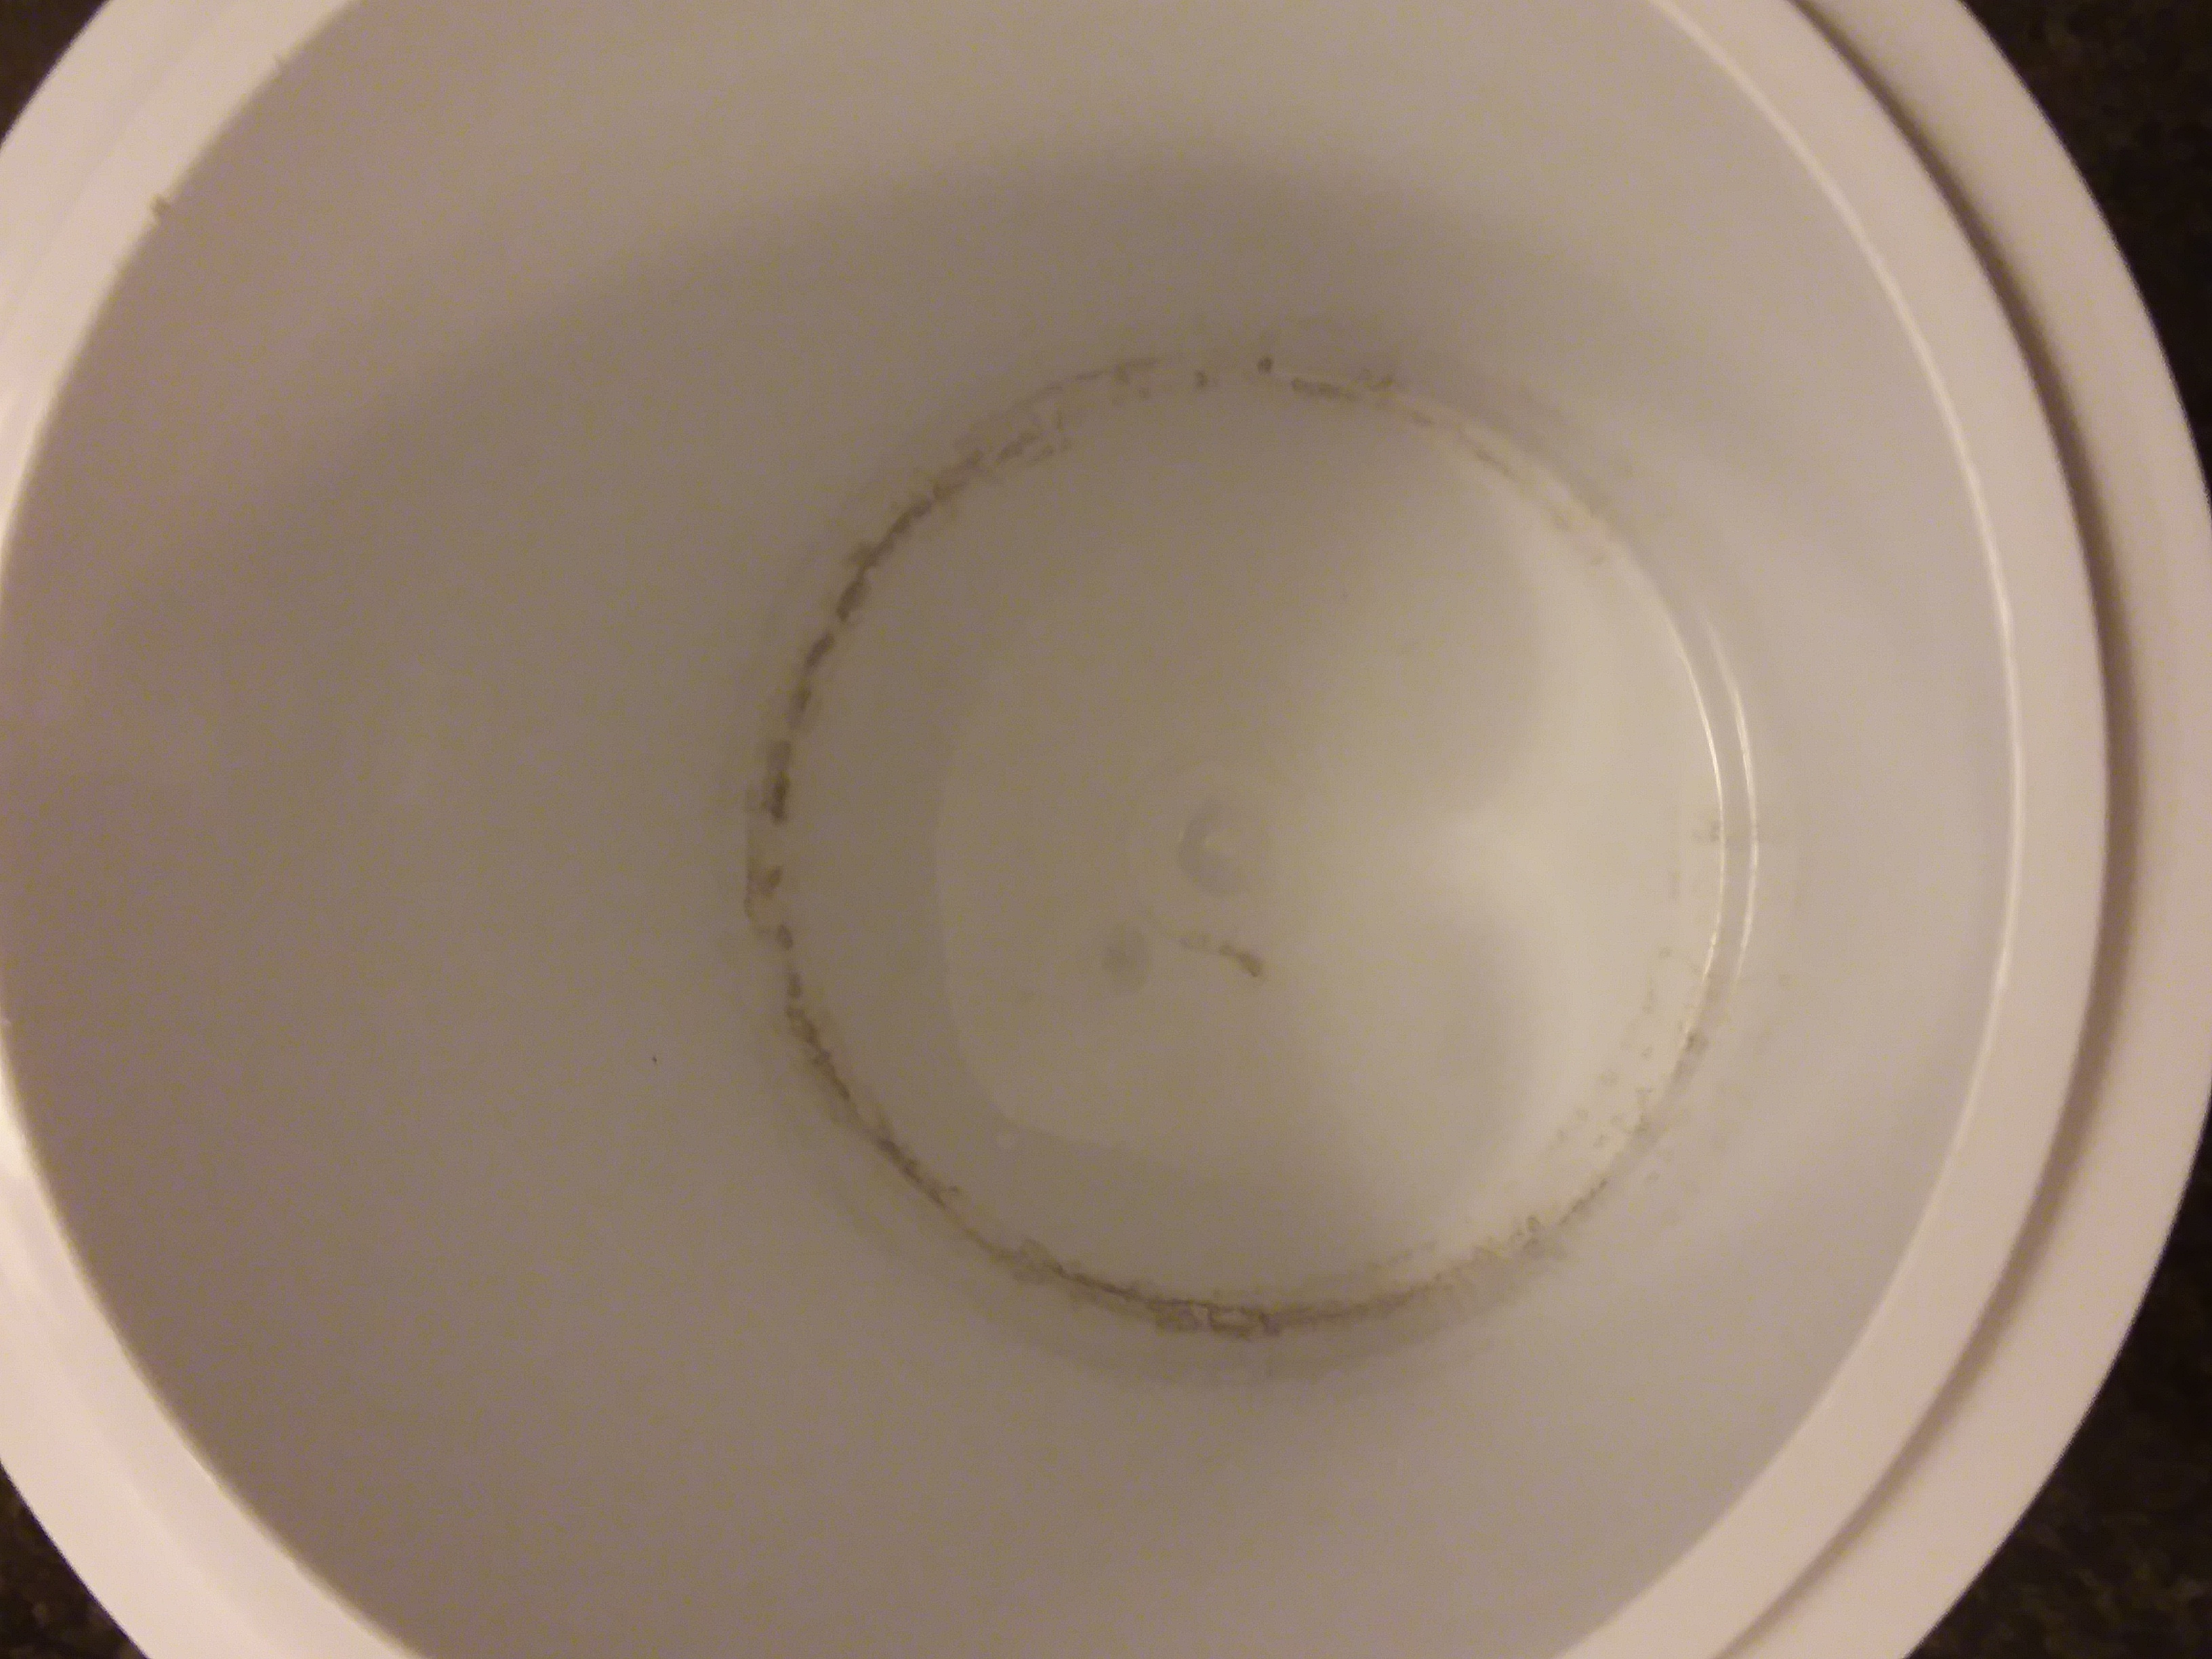 Another Reason Why You Should Use The Liner In The Ice Bucket